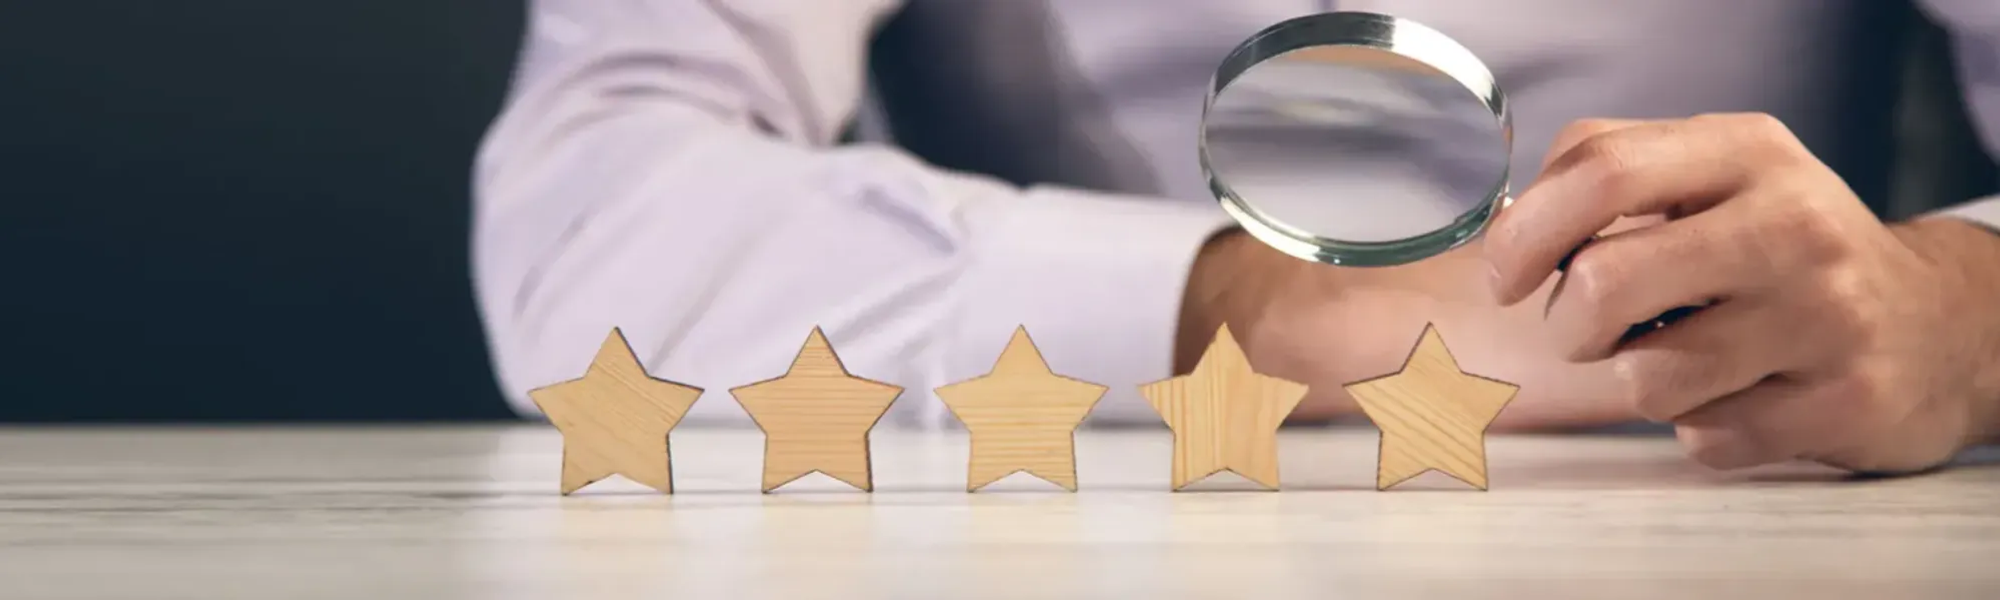 Client inspecting five star review with magnifying glass